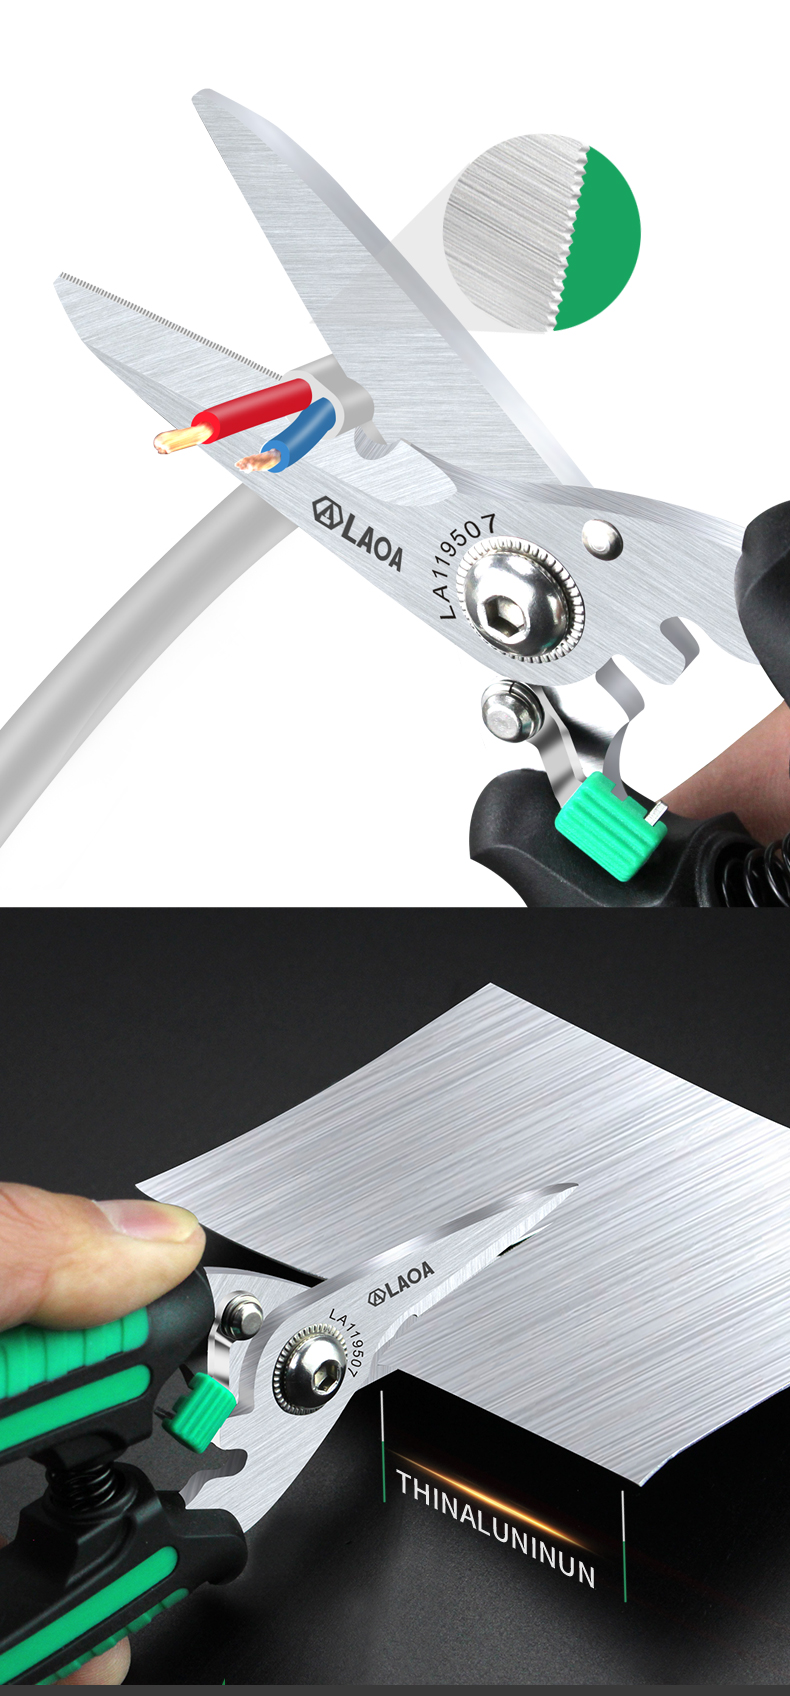 LAOA-Multifunctional-Scissors-with-safety-Lock-Stainless-Shears-Cutting-Leather-Wire-cutters-Househo-1799319-8